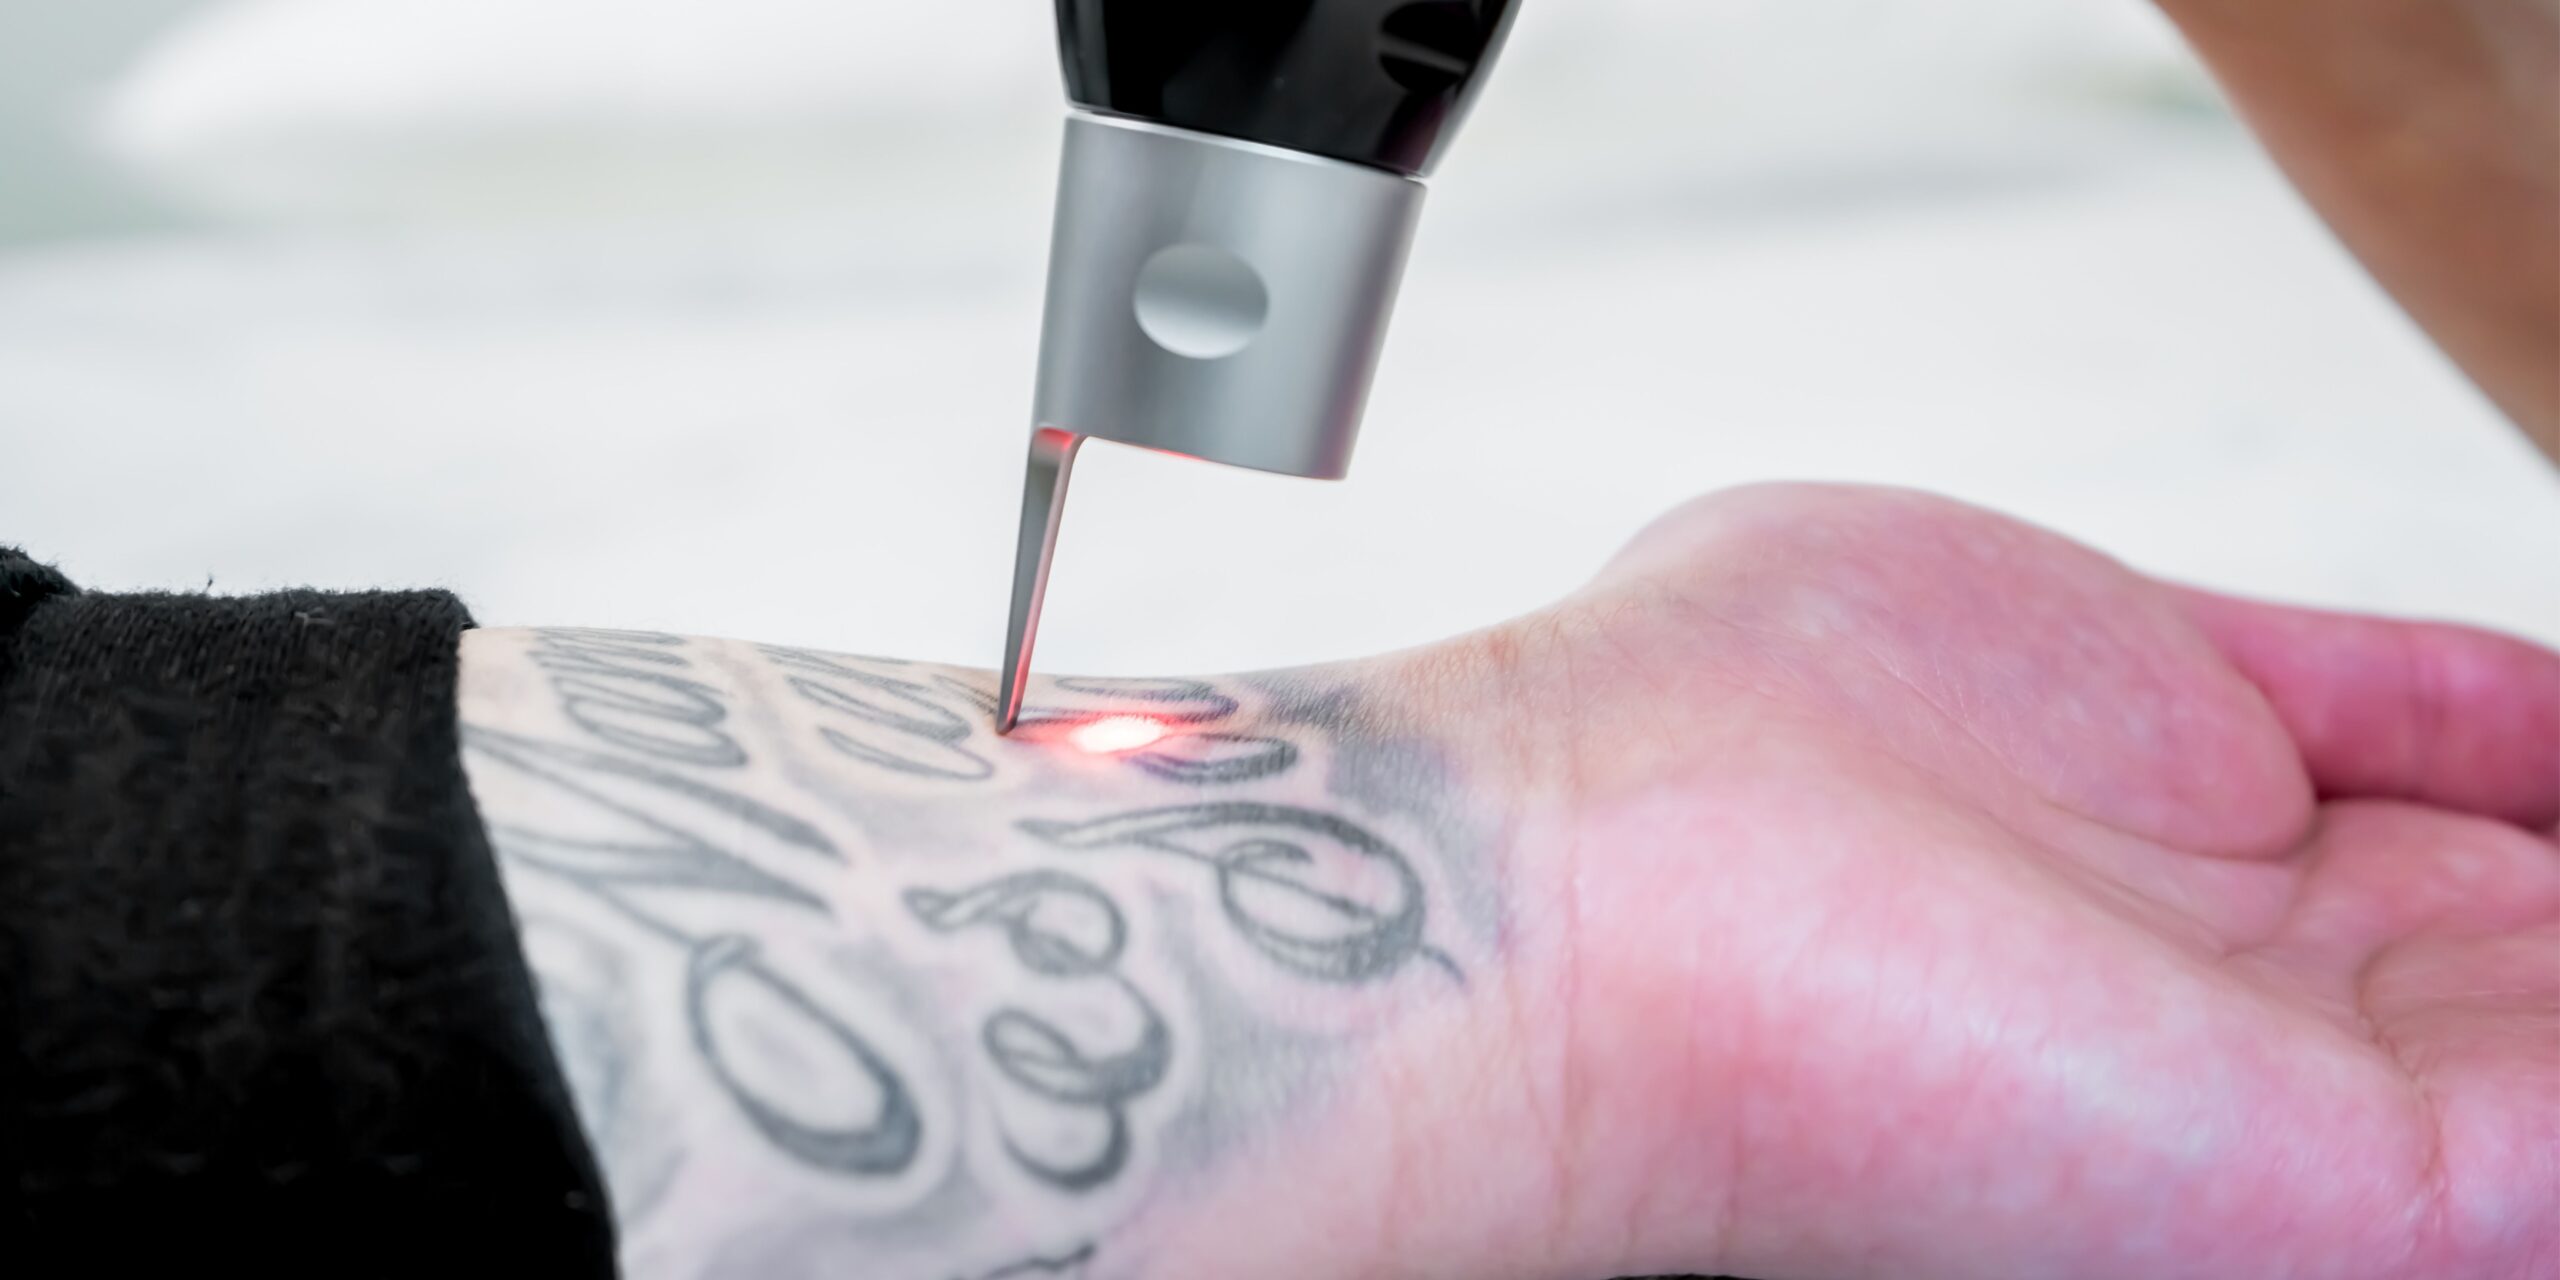 Not so permanent tattoos — Tailored Tattoo Removal Melbourne